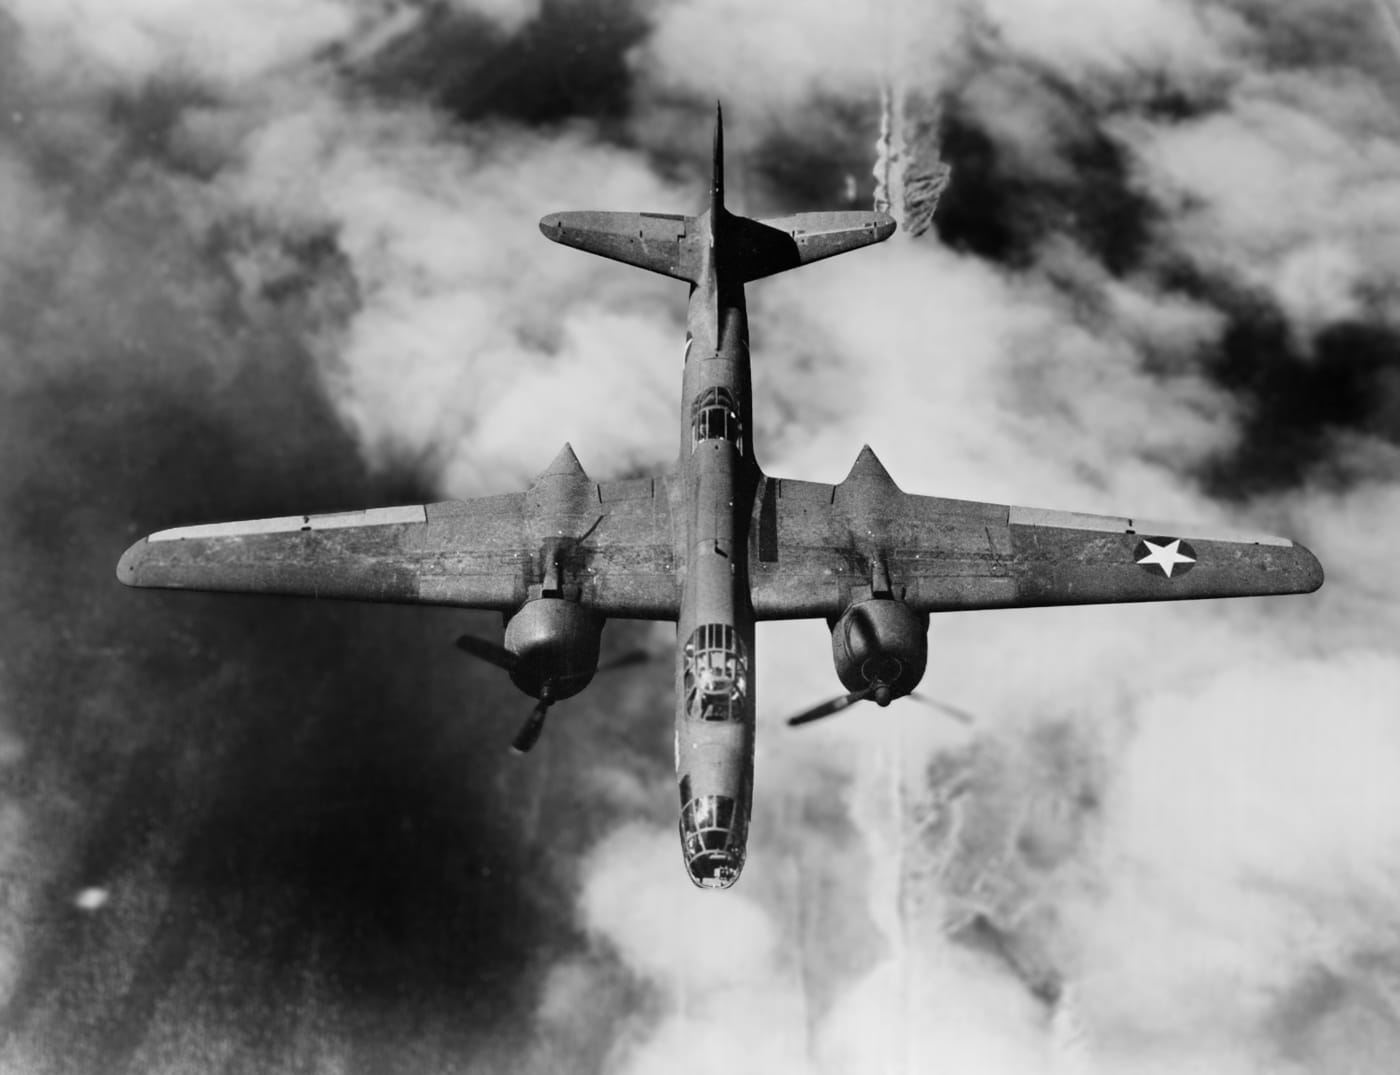 In this photo, we see the top of an A-20 Havoc while in flight over Europe. The Douglas A-20 Havoc is an American medium bomber, attack aircraft, night intruder, night fighter, and reconnaissance aircraft of World War II.